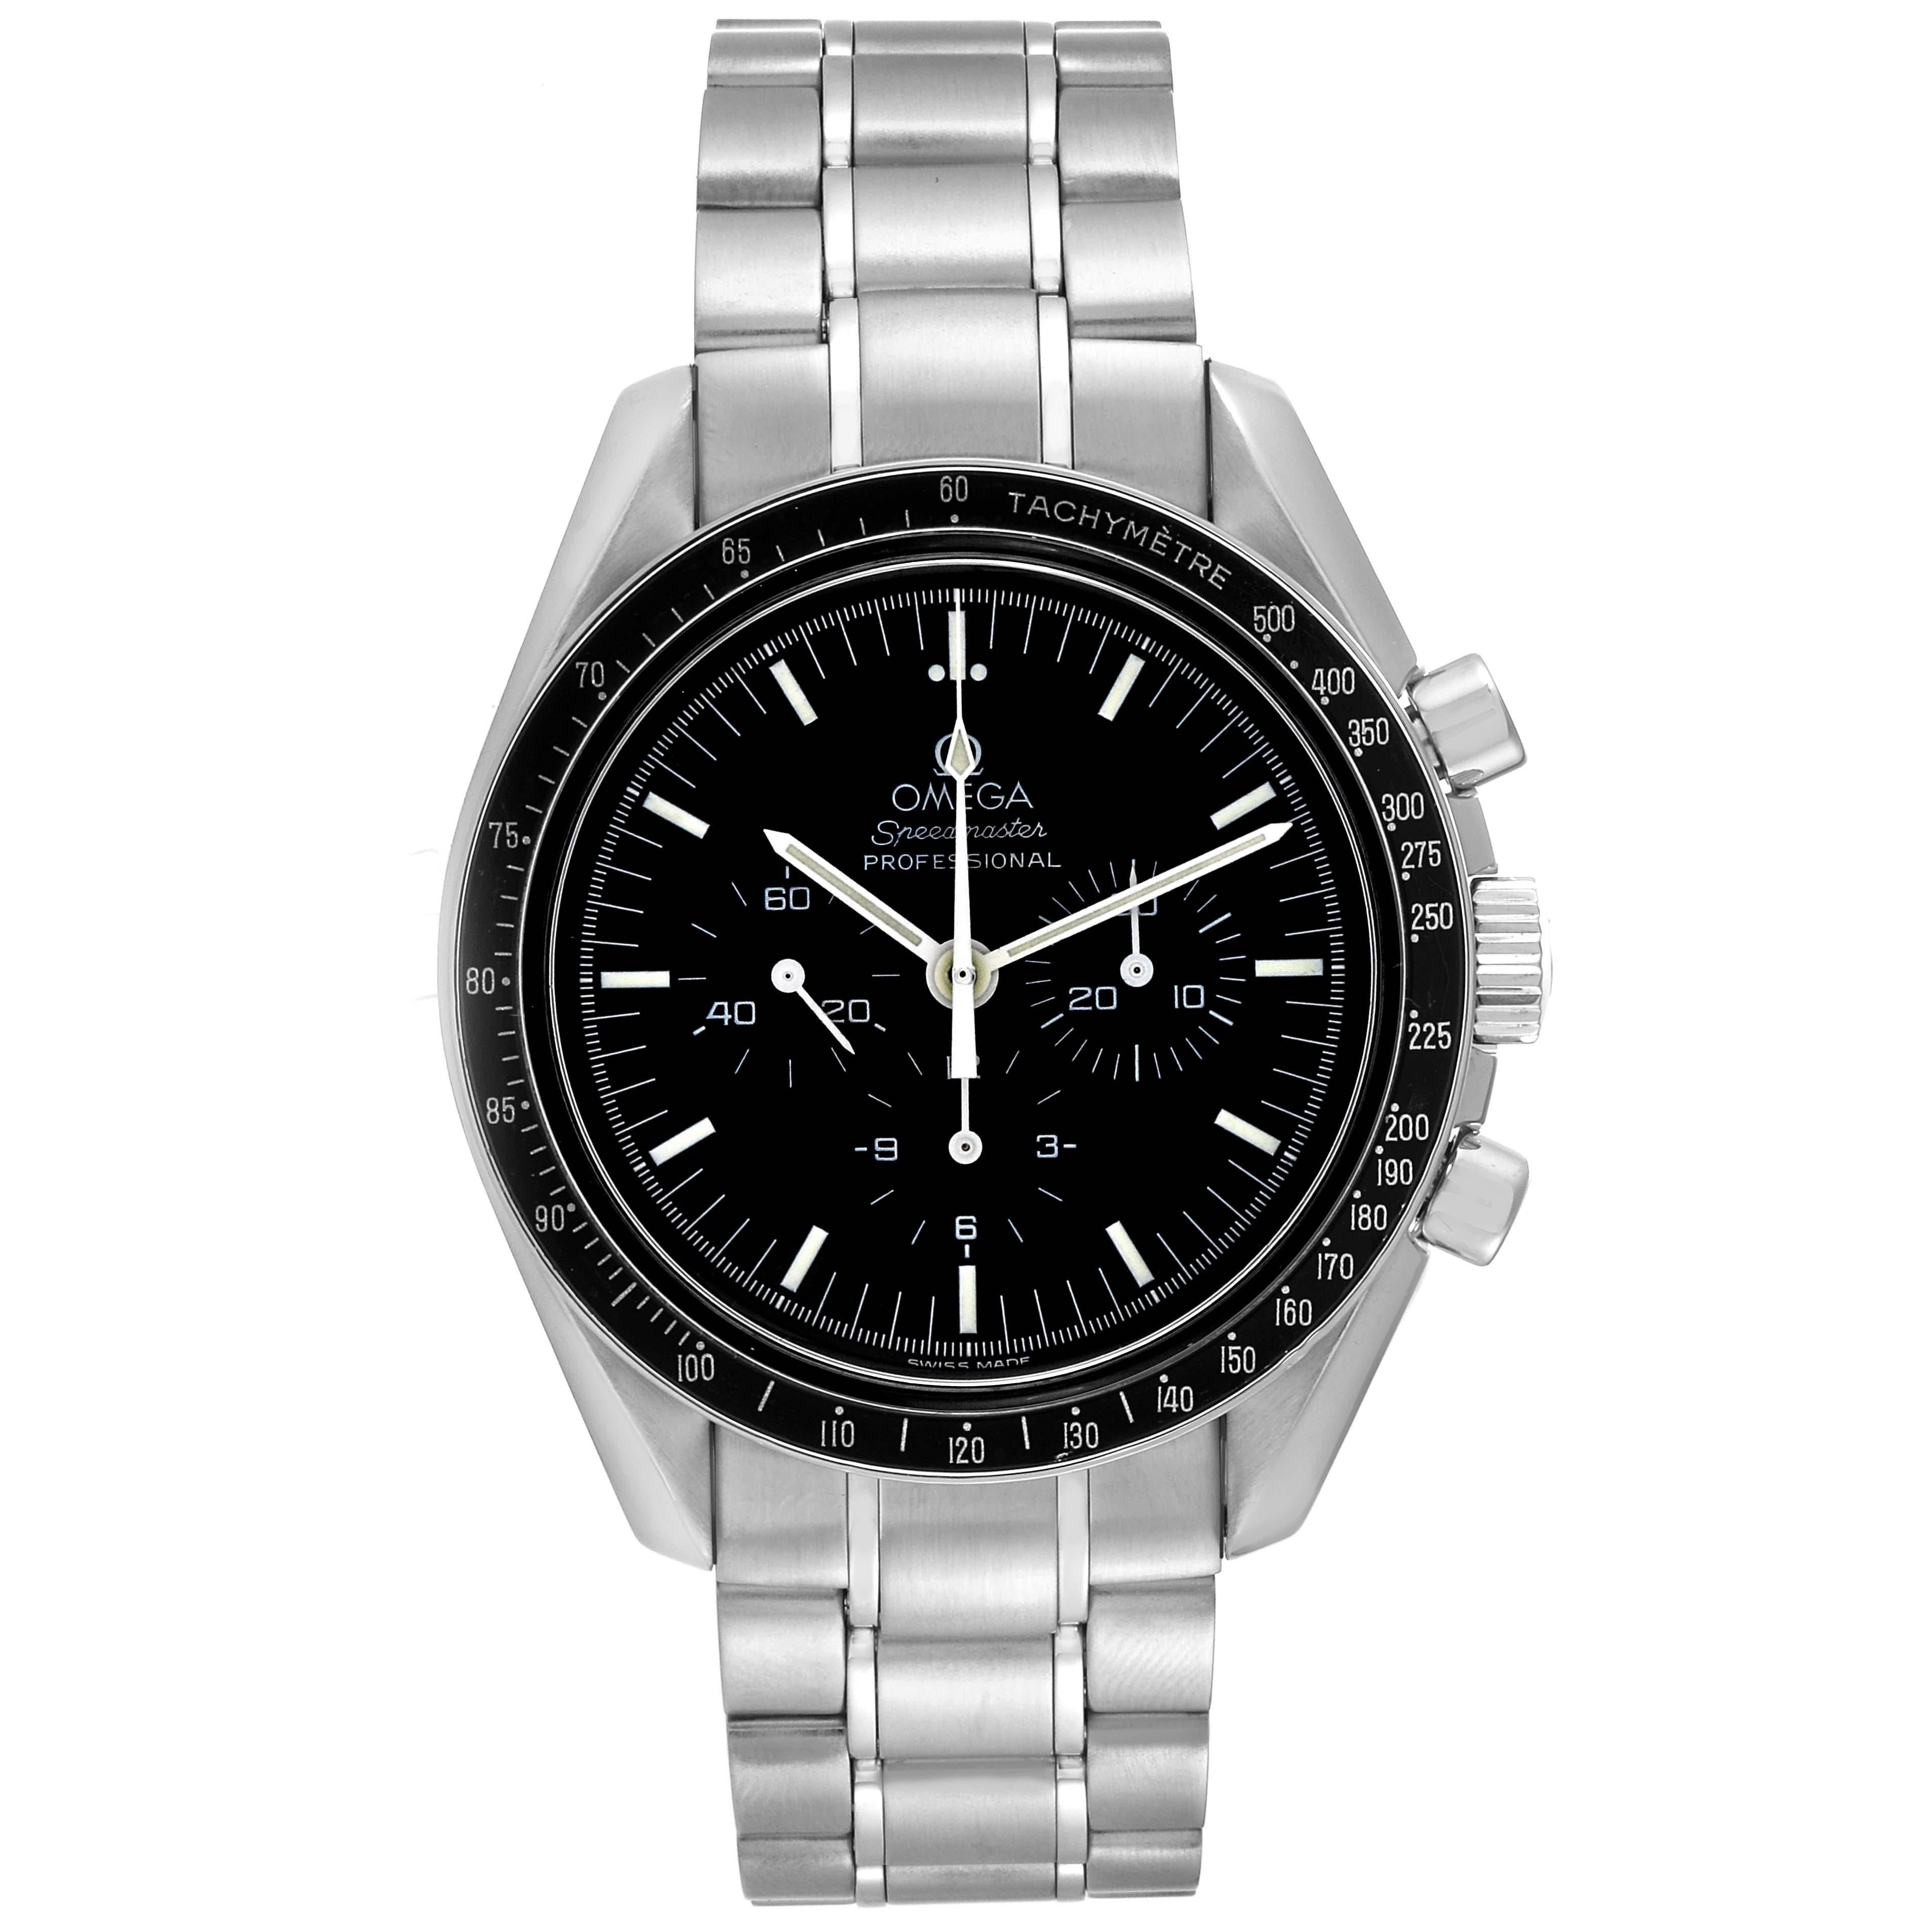 Omega Speedmaster Moonwatch Hesalite Sapphire Steel Mens Watch 3572.50.00 Box Card. Manual winding chronograph movement. Caliber 1863. Stainless steel round case 42.0 mm in diameter. Exhibition transparent sapphire crystal caseback. Stainless steel